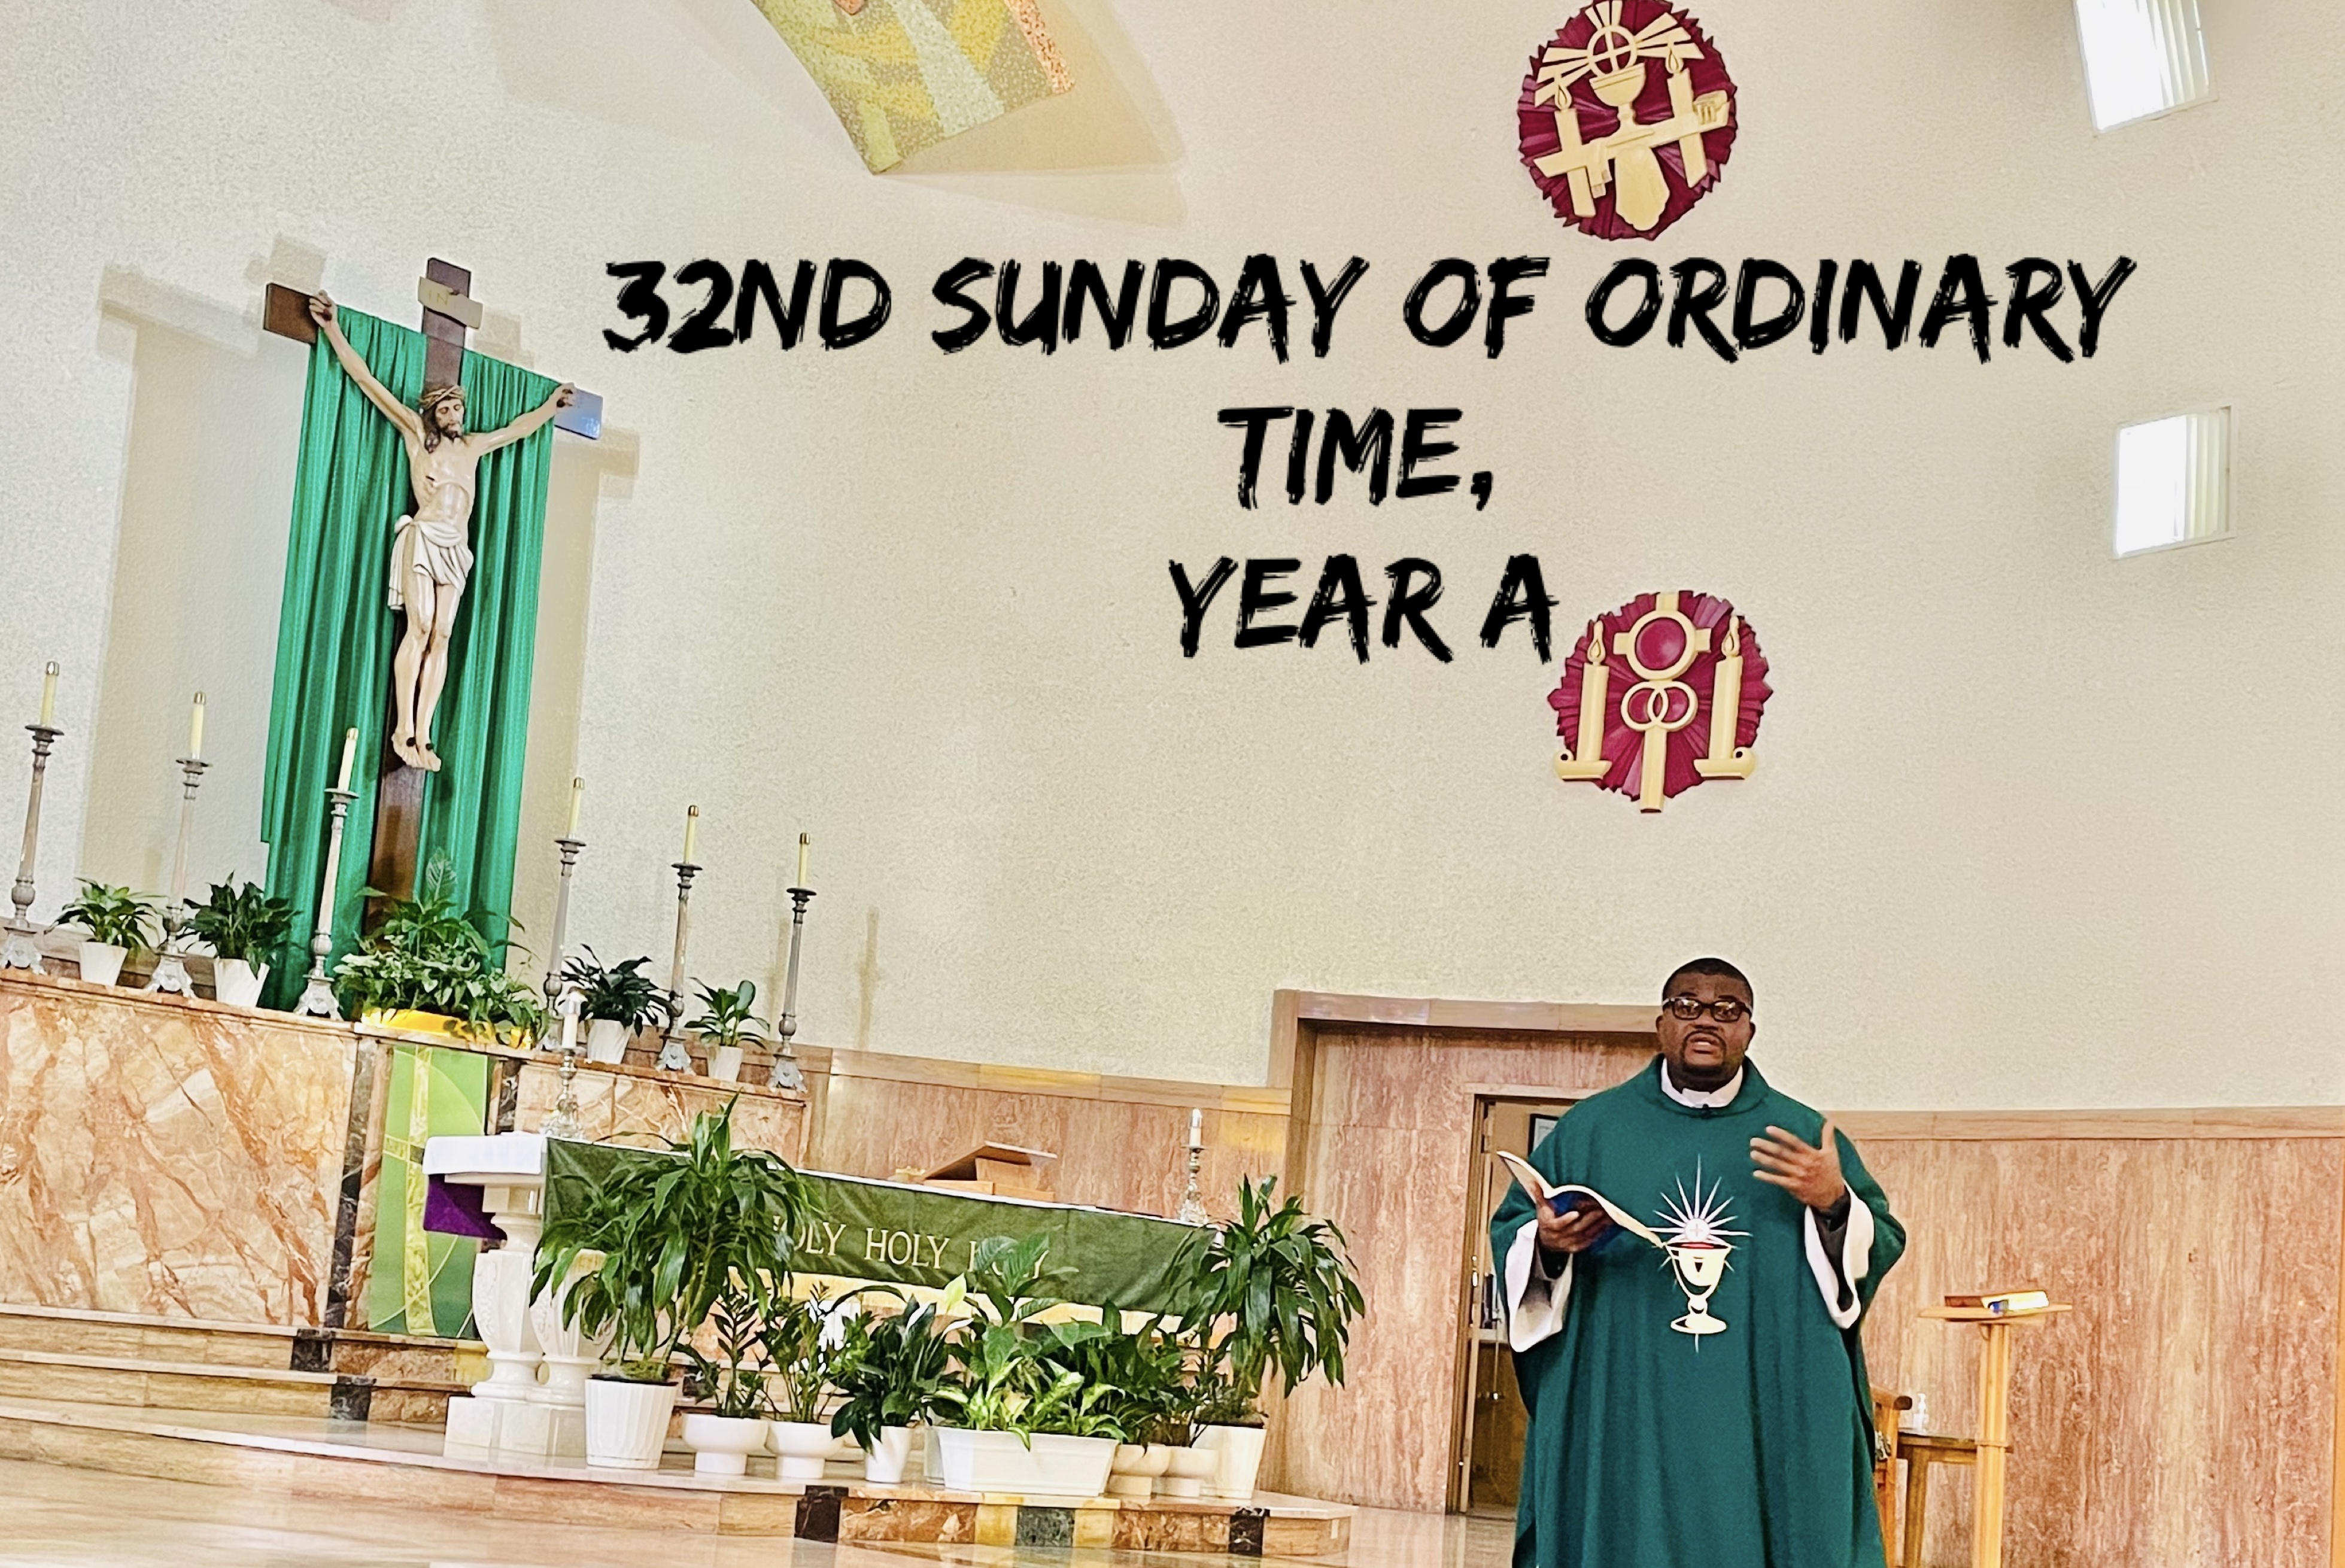 32nd Sunday of Ordinary Time, Year A 